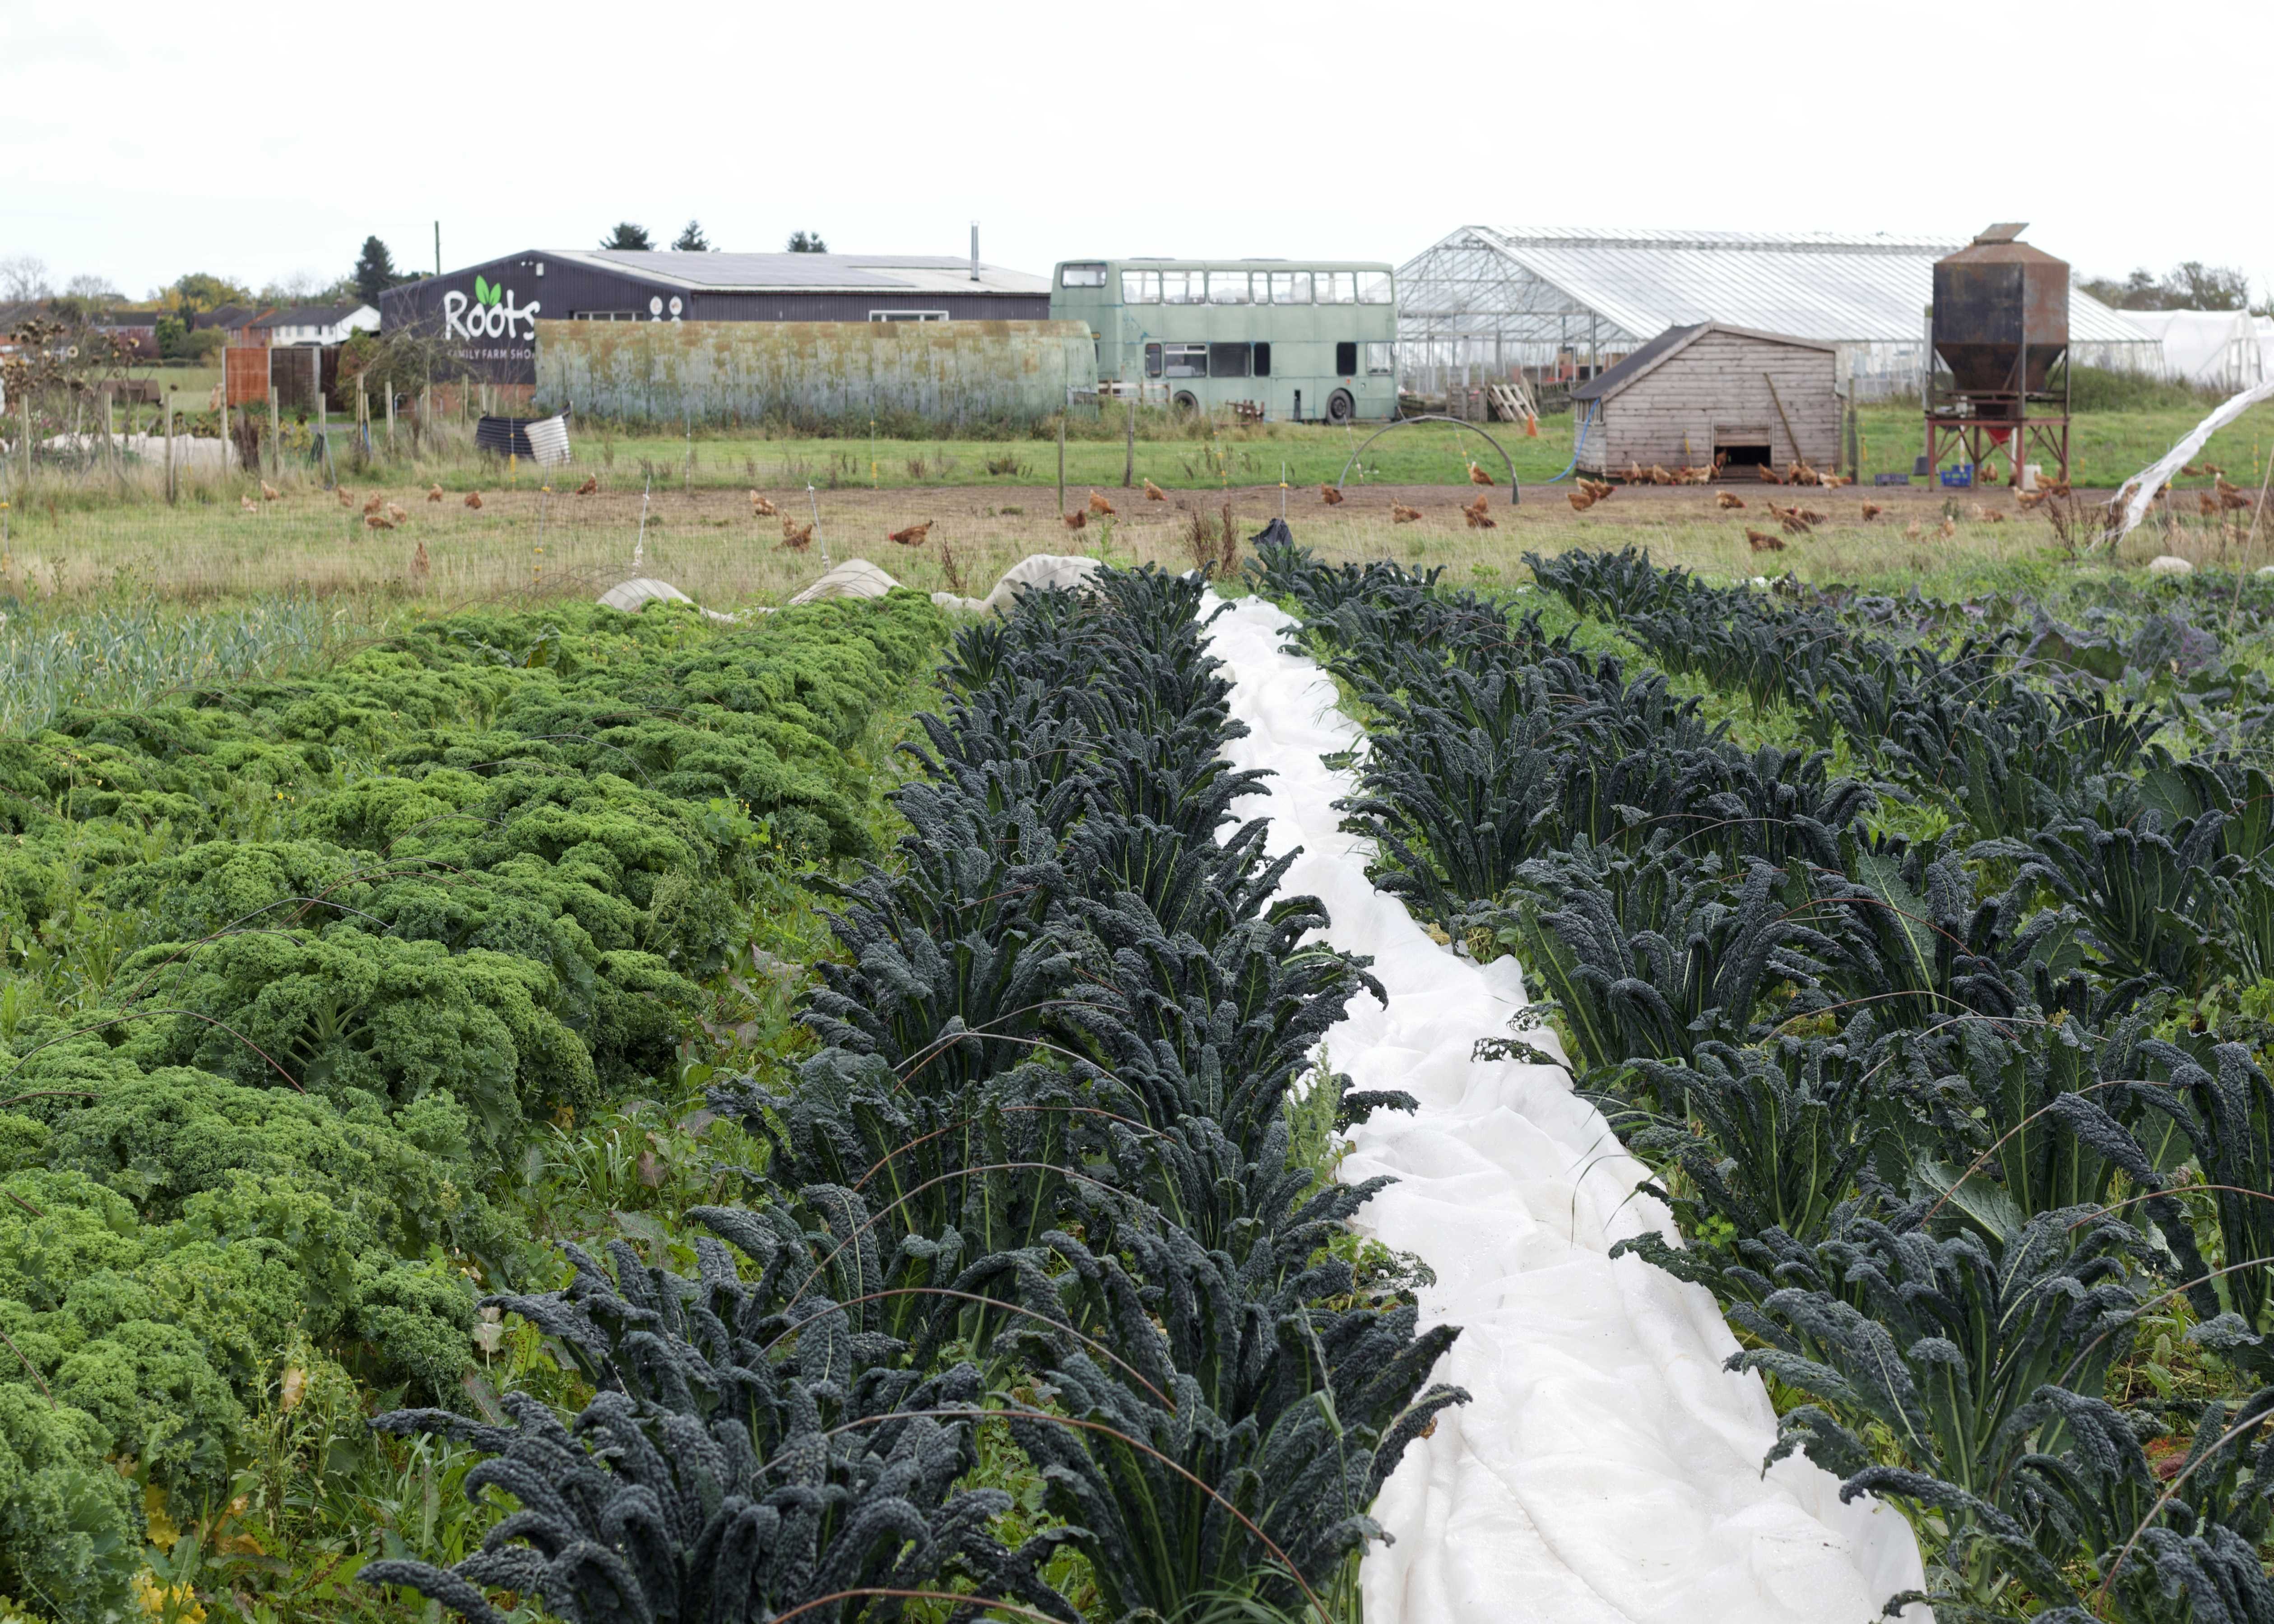 Rows of kale crops in the field at Roots Family Farm Shop with the egg laying chickens in the background